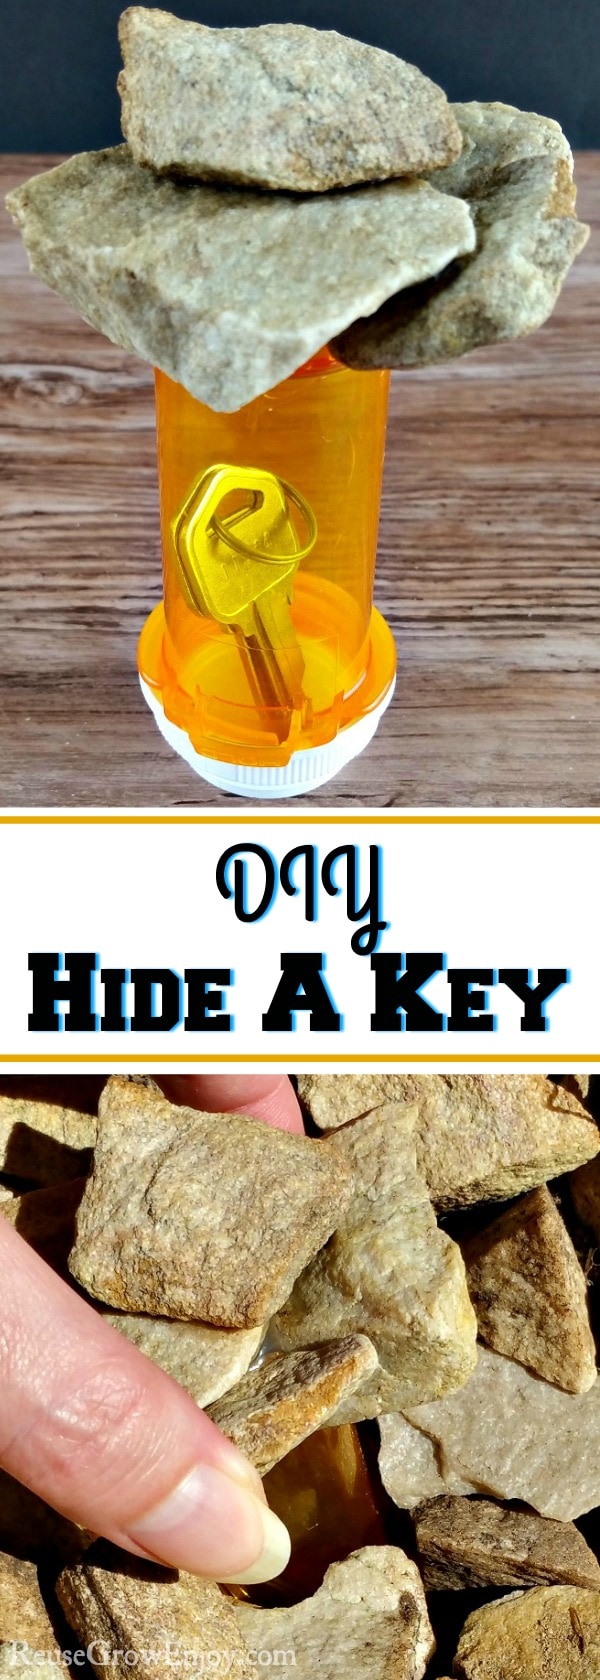 Everyone needs a safe place to stash a key for those times you lock or forgot yours. Check out this DIY Hide A Key - Made From RX Bottle!